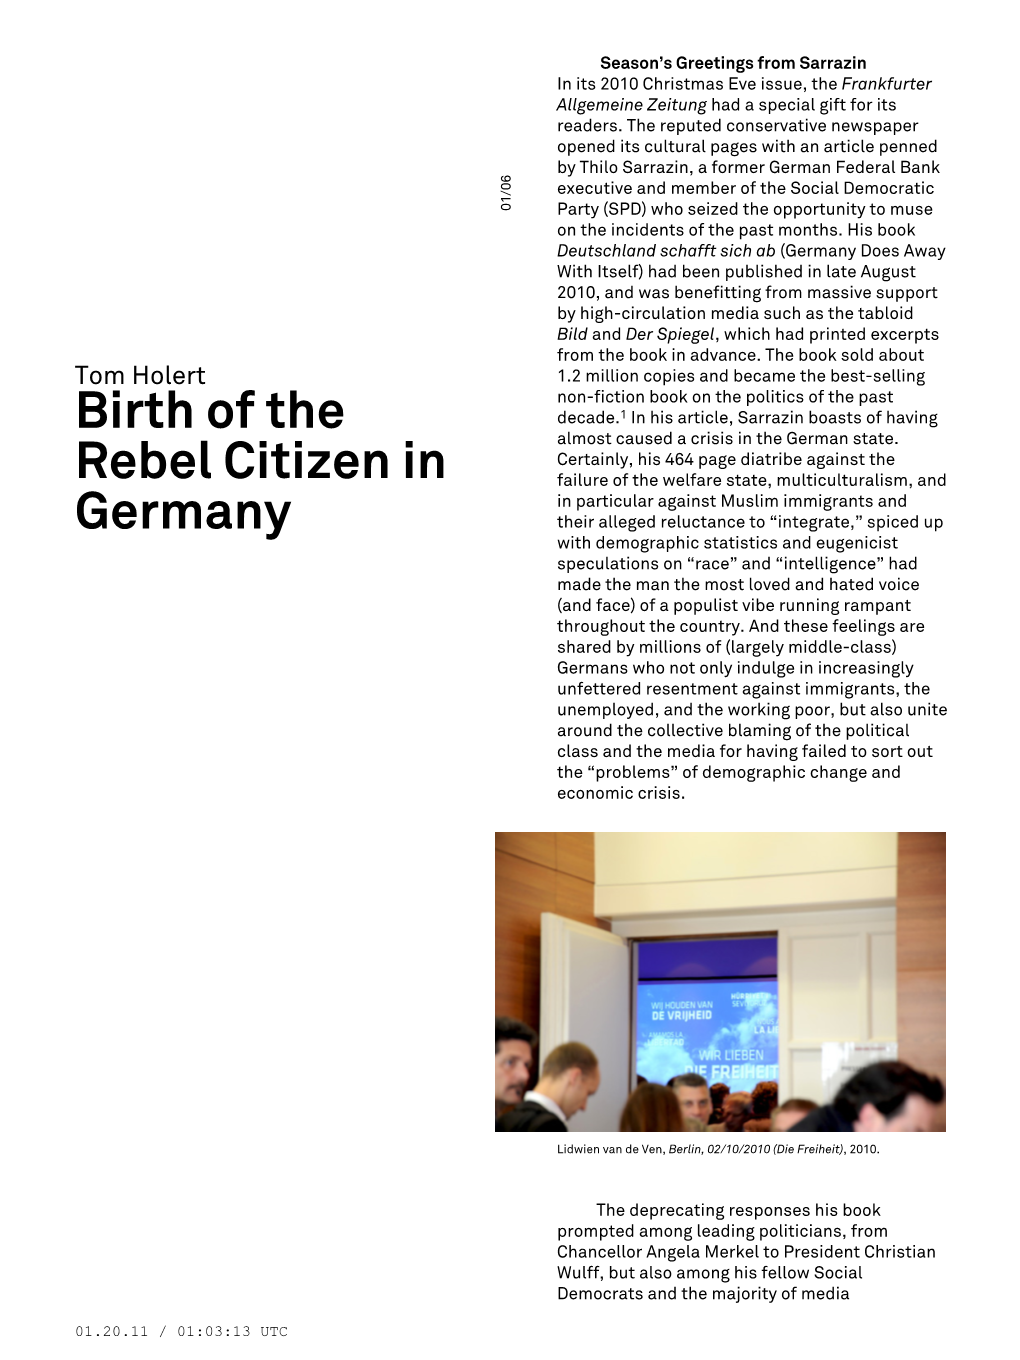 Birth of the Rebel Citizen in Germany